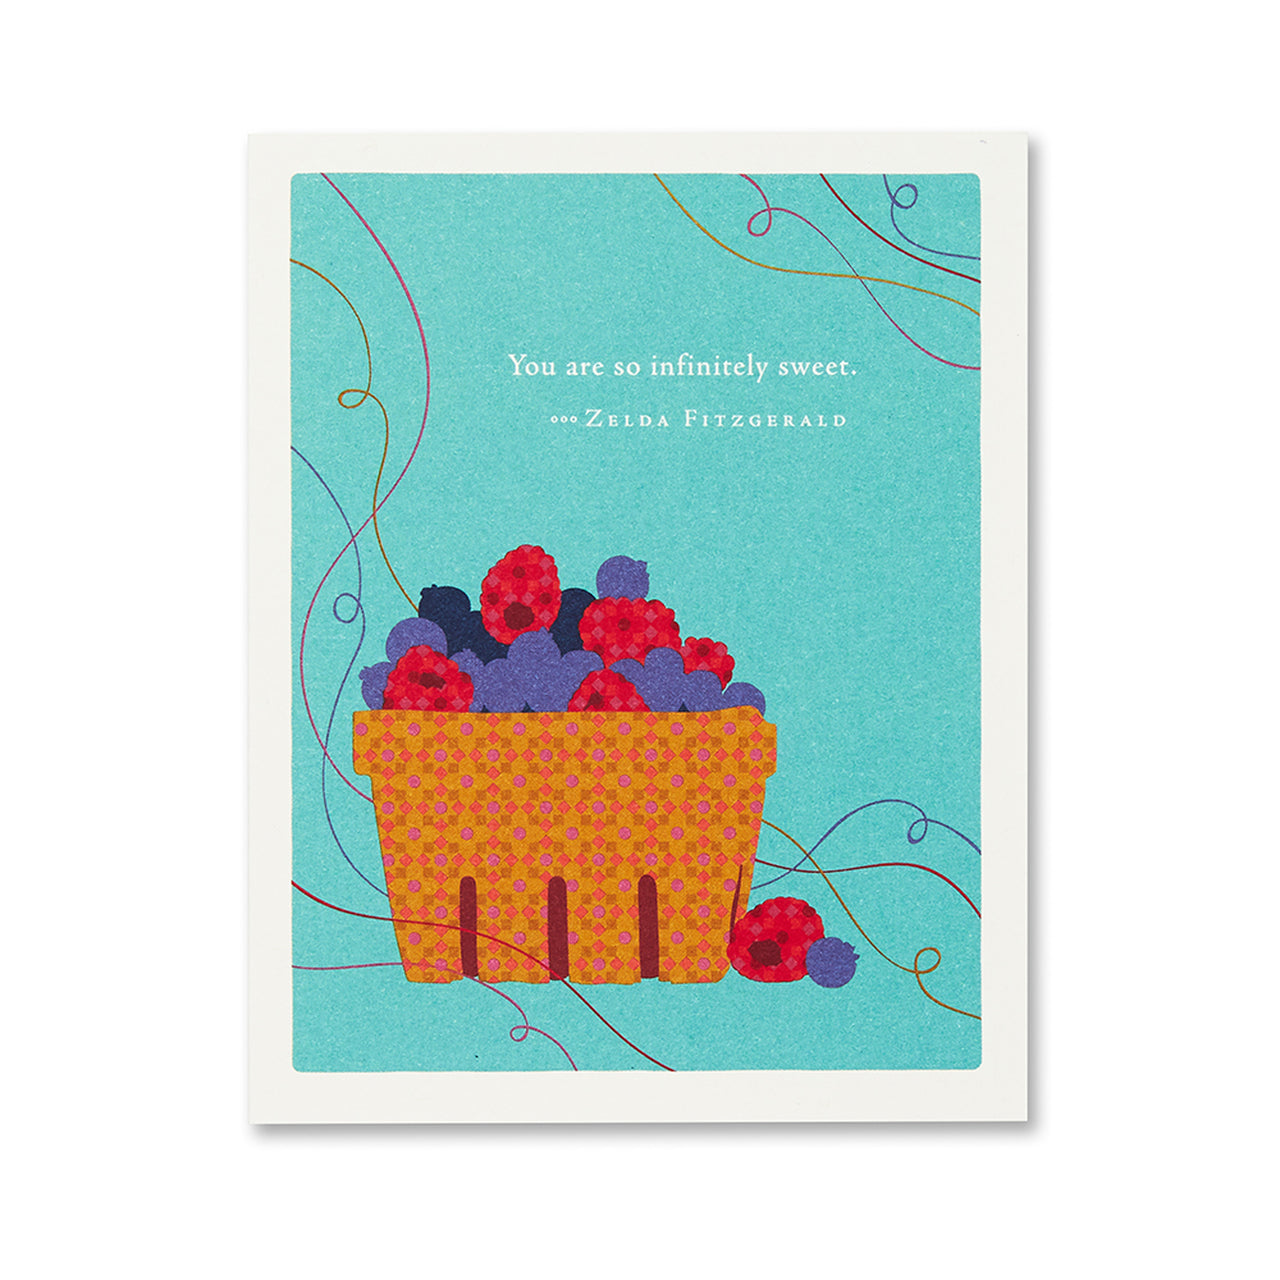 front is a berry box with over flowing berries and text